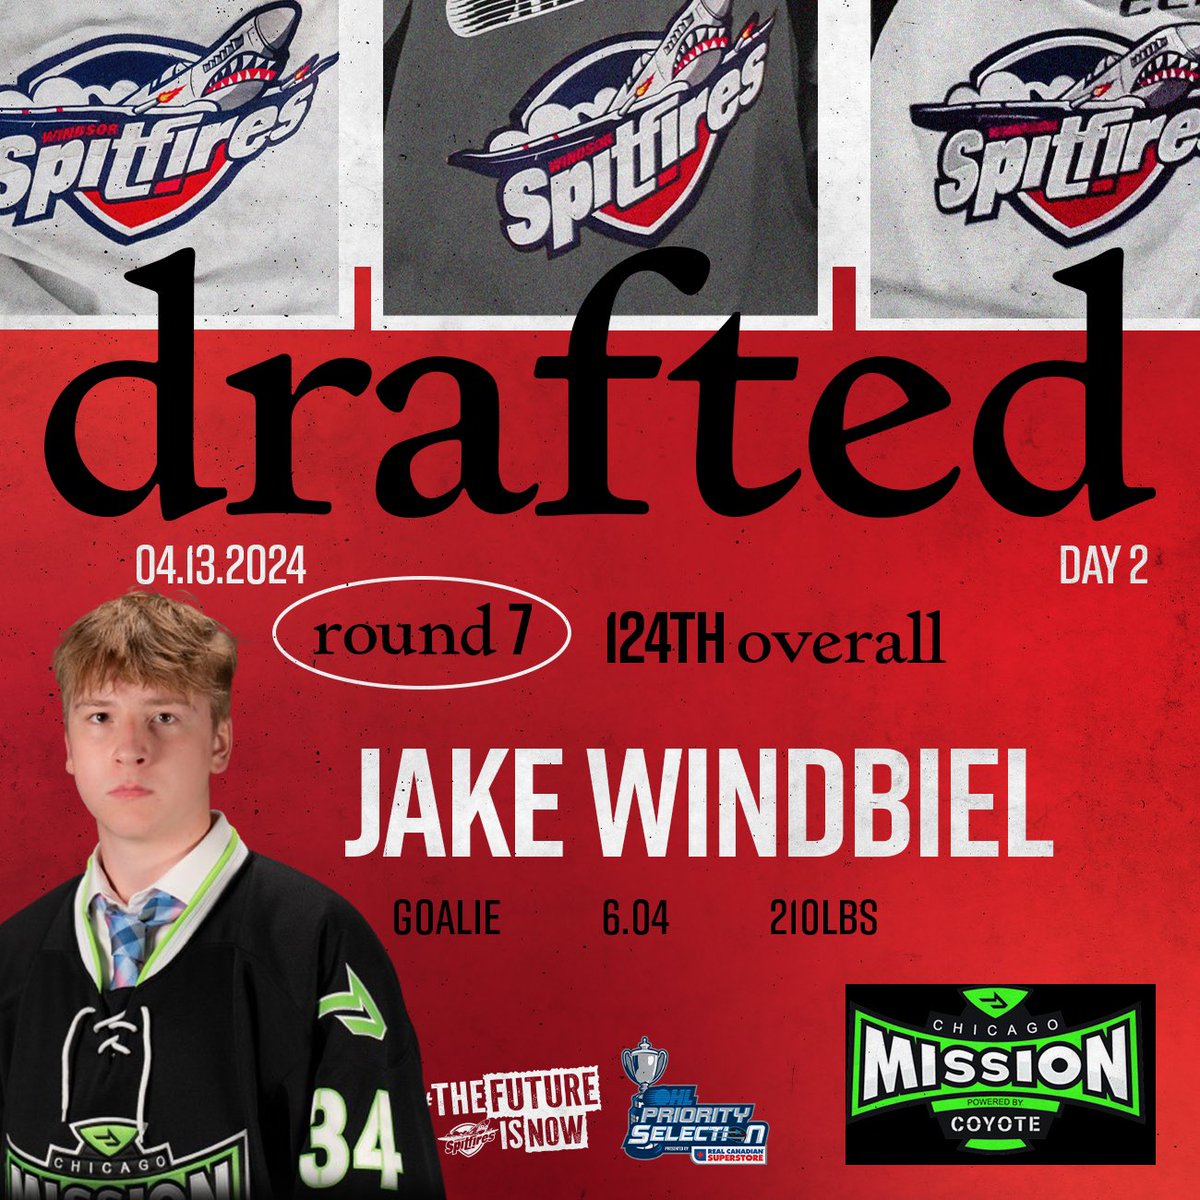 With the 124th overall pick in the 2024 OHL Priority Selection, the Windsor Spitfires are proud to select Jake Windbiel from the Chicago Mission team! #WindsorSpitfires #OHLDraft